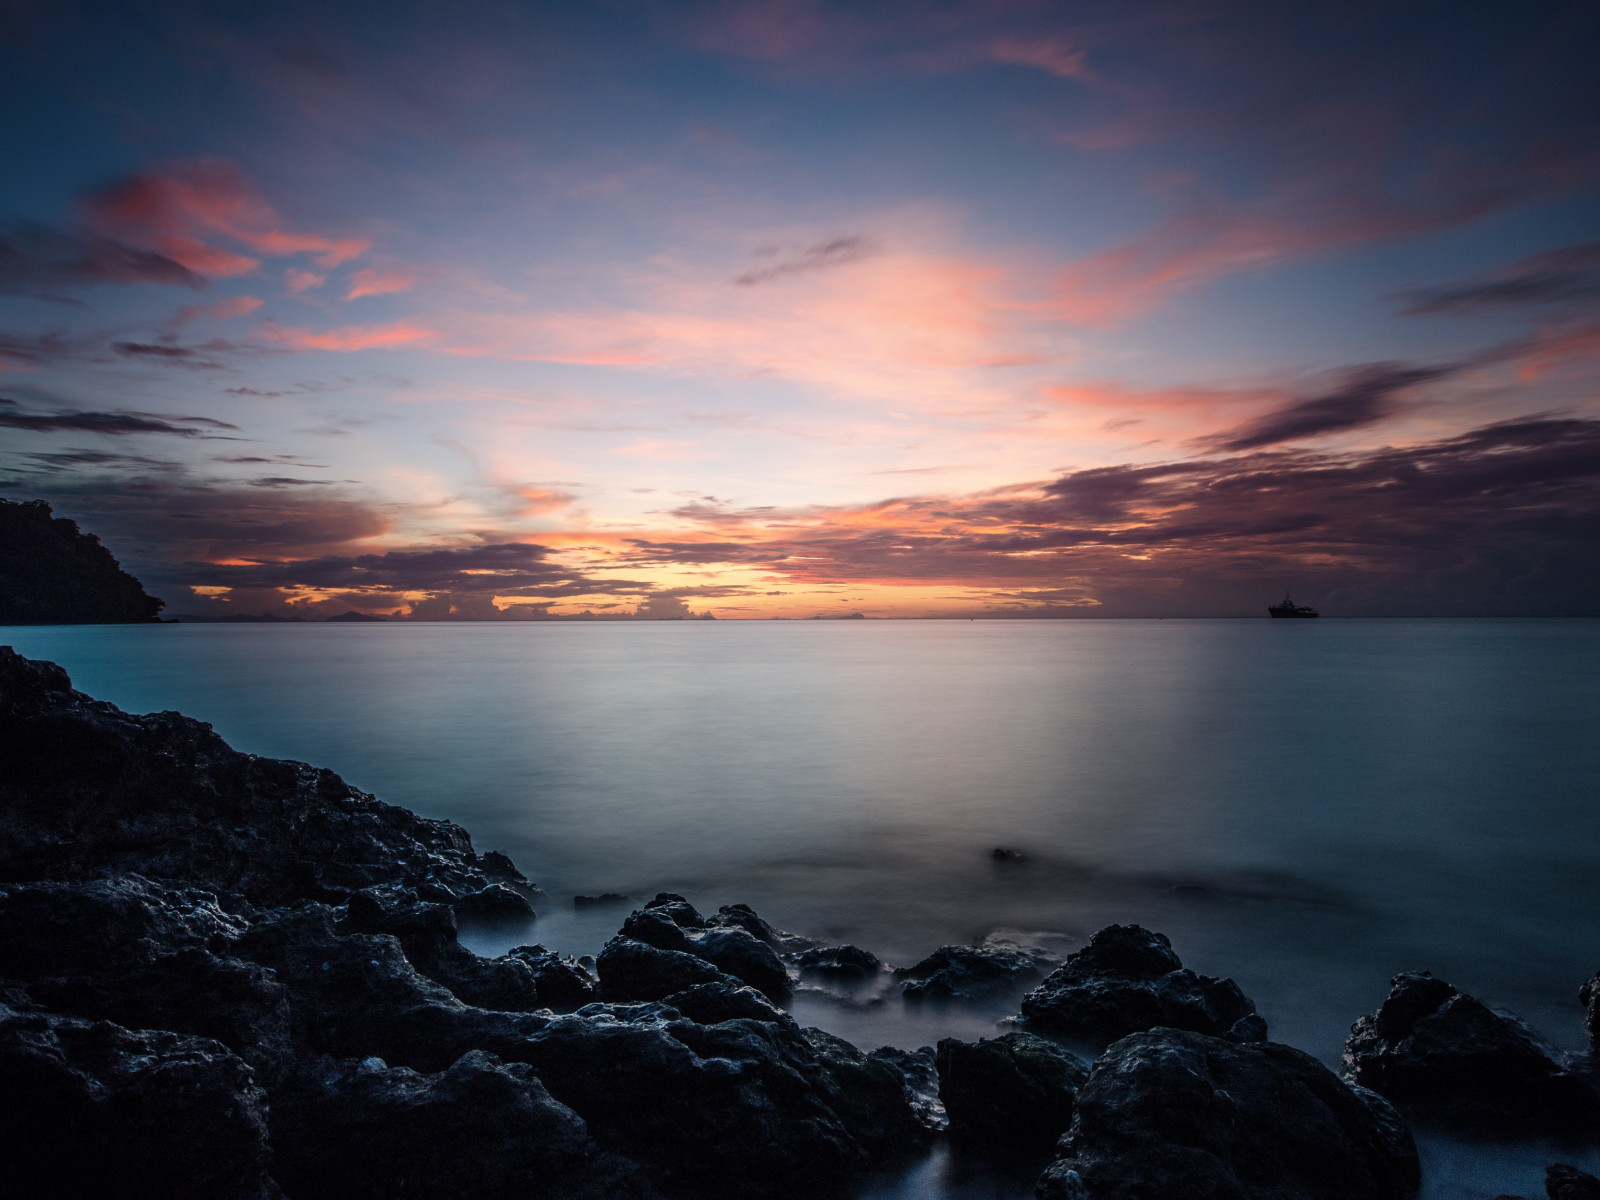 Sunset, rocks, clouds, view from Thailand wallpaper 1600x1200